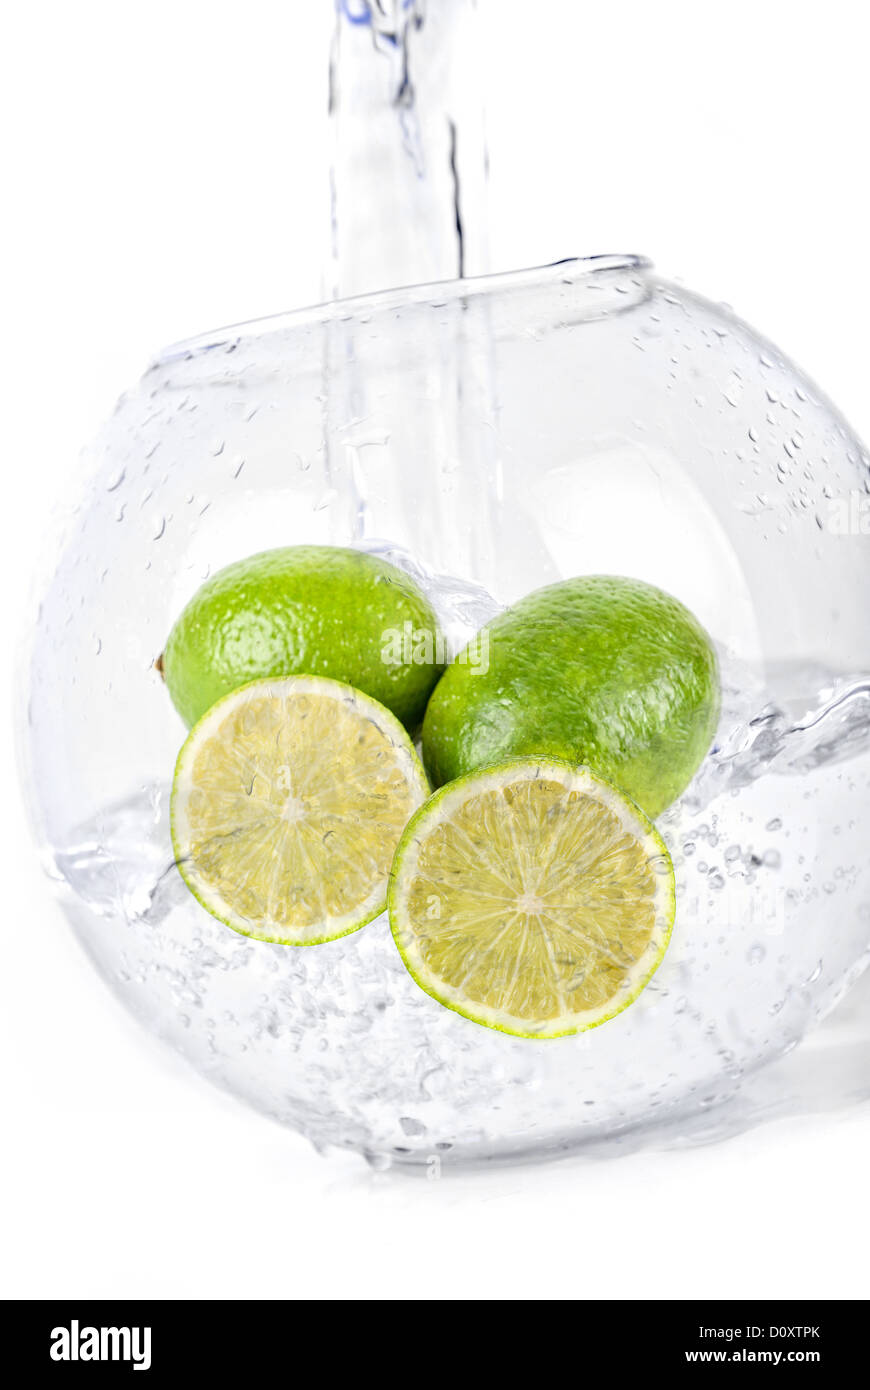 limes in water Stock Photo